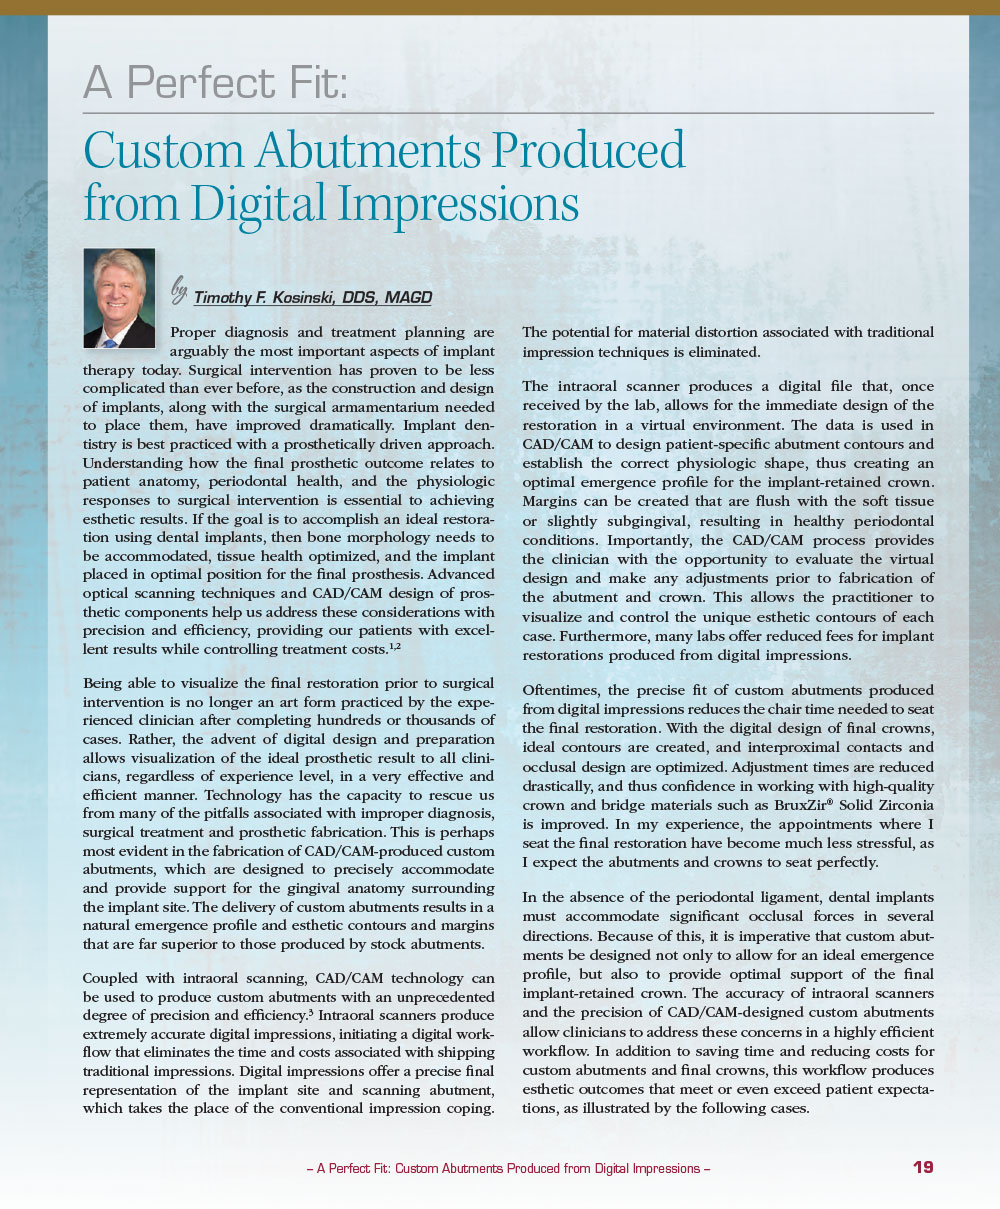 A Perfect Fit: Custom Abutments Produced from Digital Impressions by Timothy F. Kosinski, DDS, MAGD